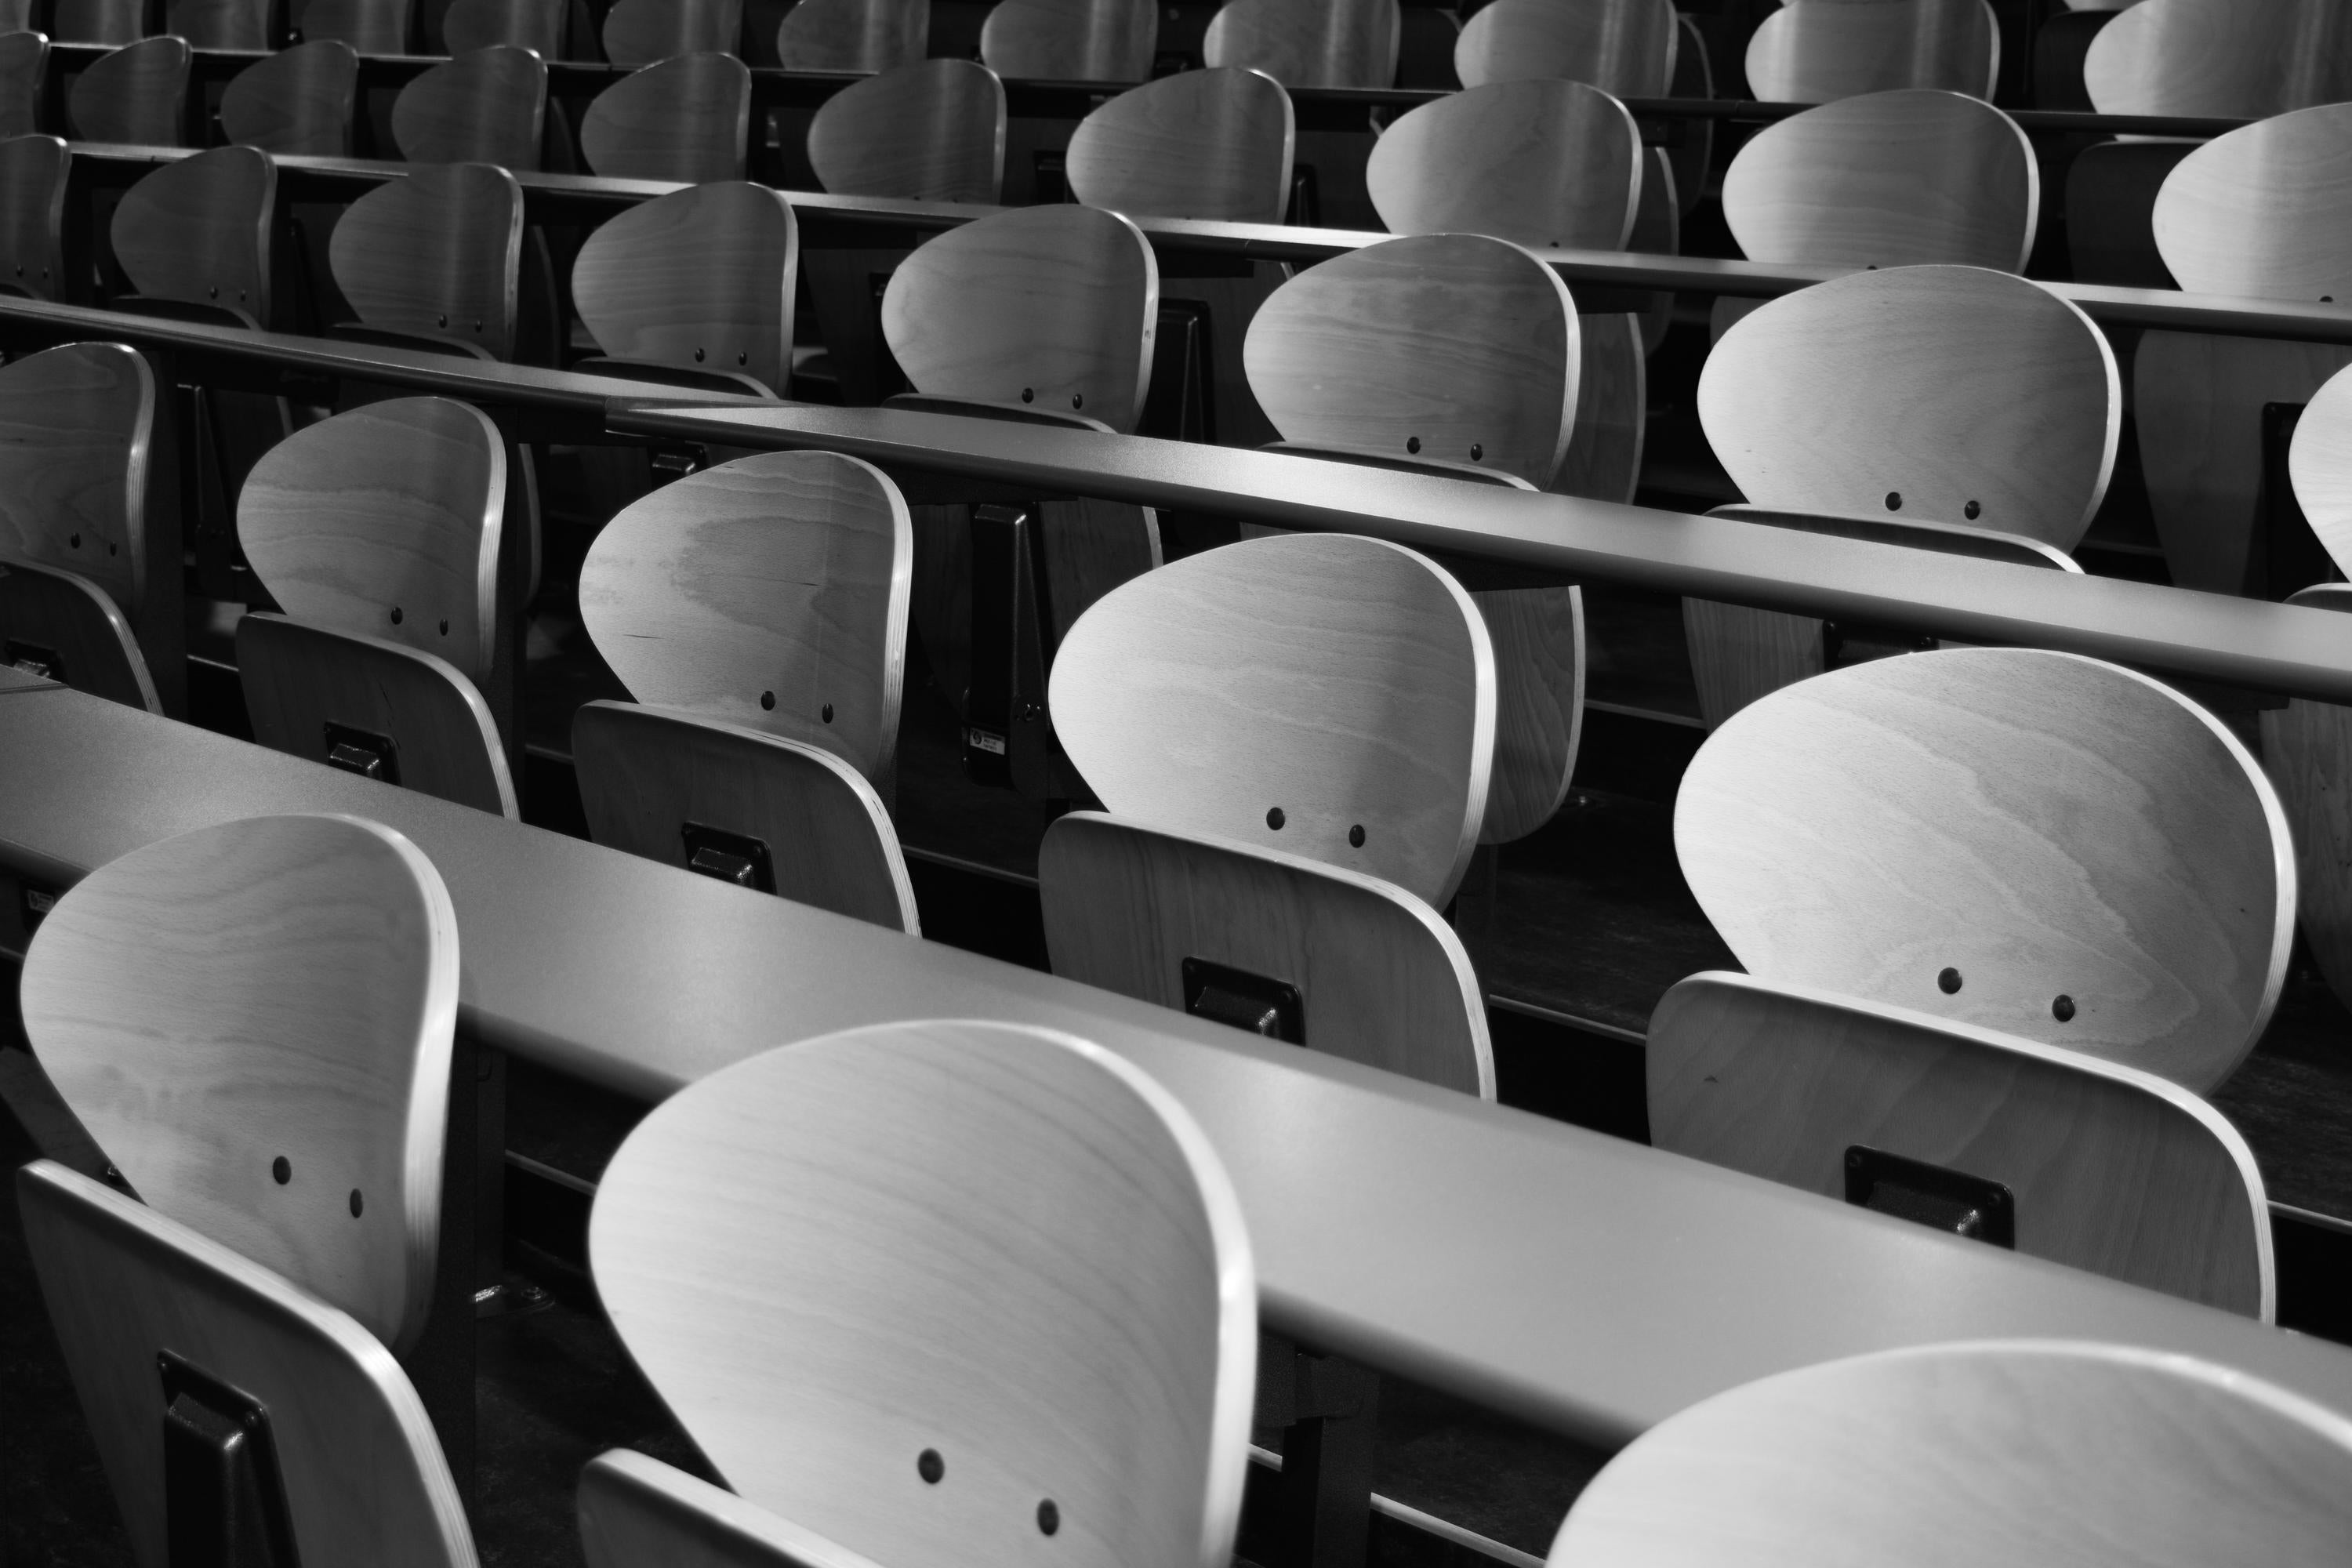 Black and white photo of lecture hall seating